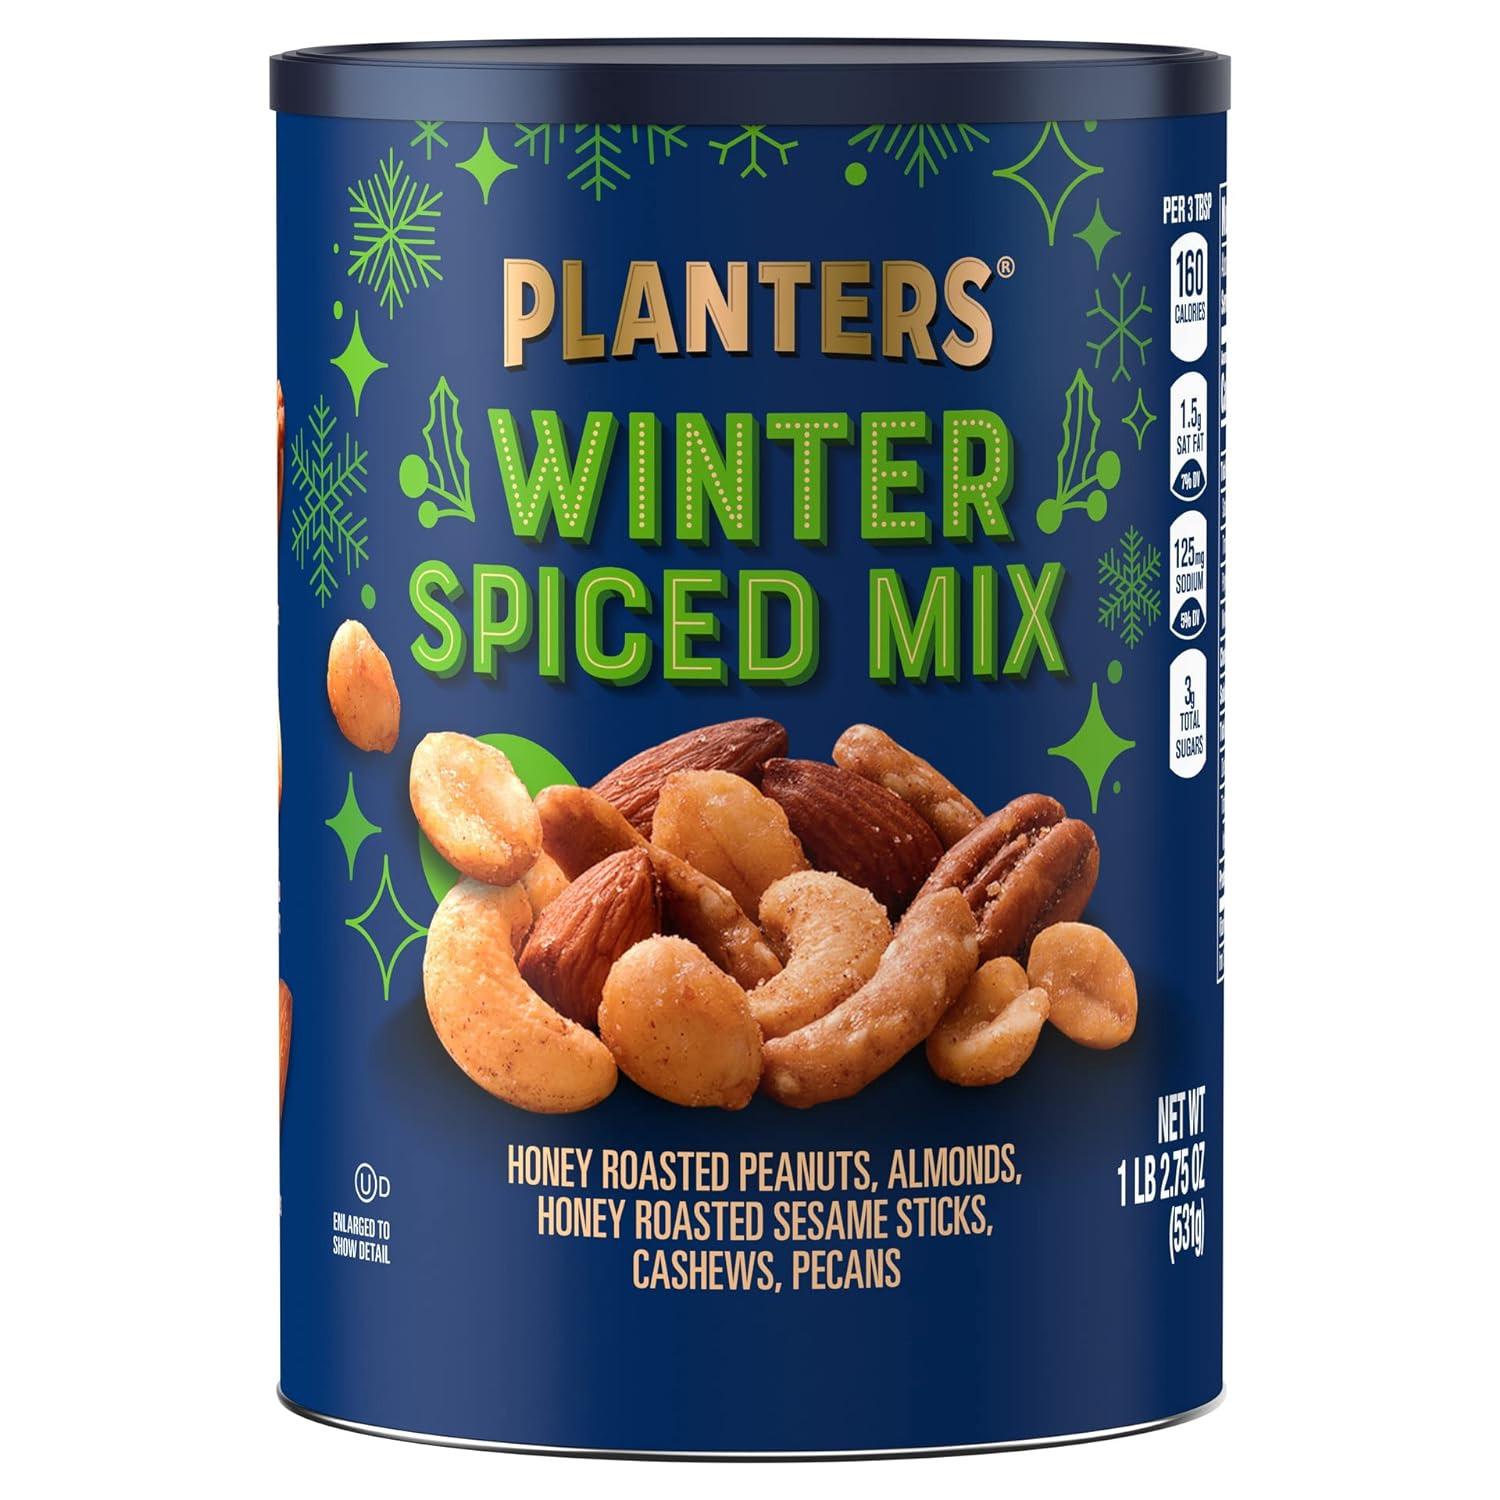 Planters Mixed Nuts Winter Spiced Mix for $5.30